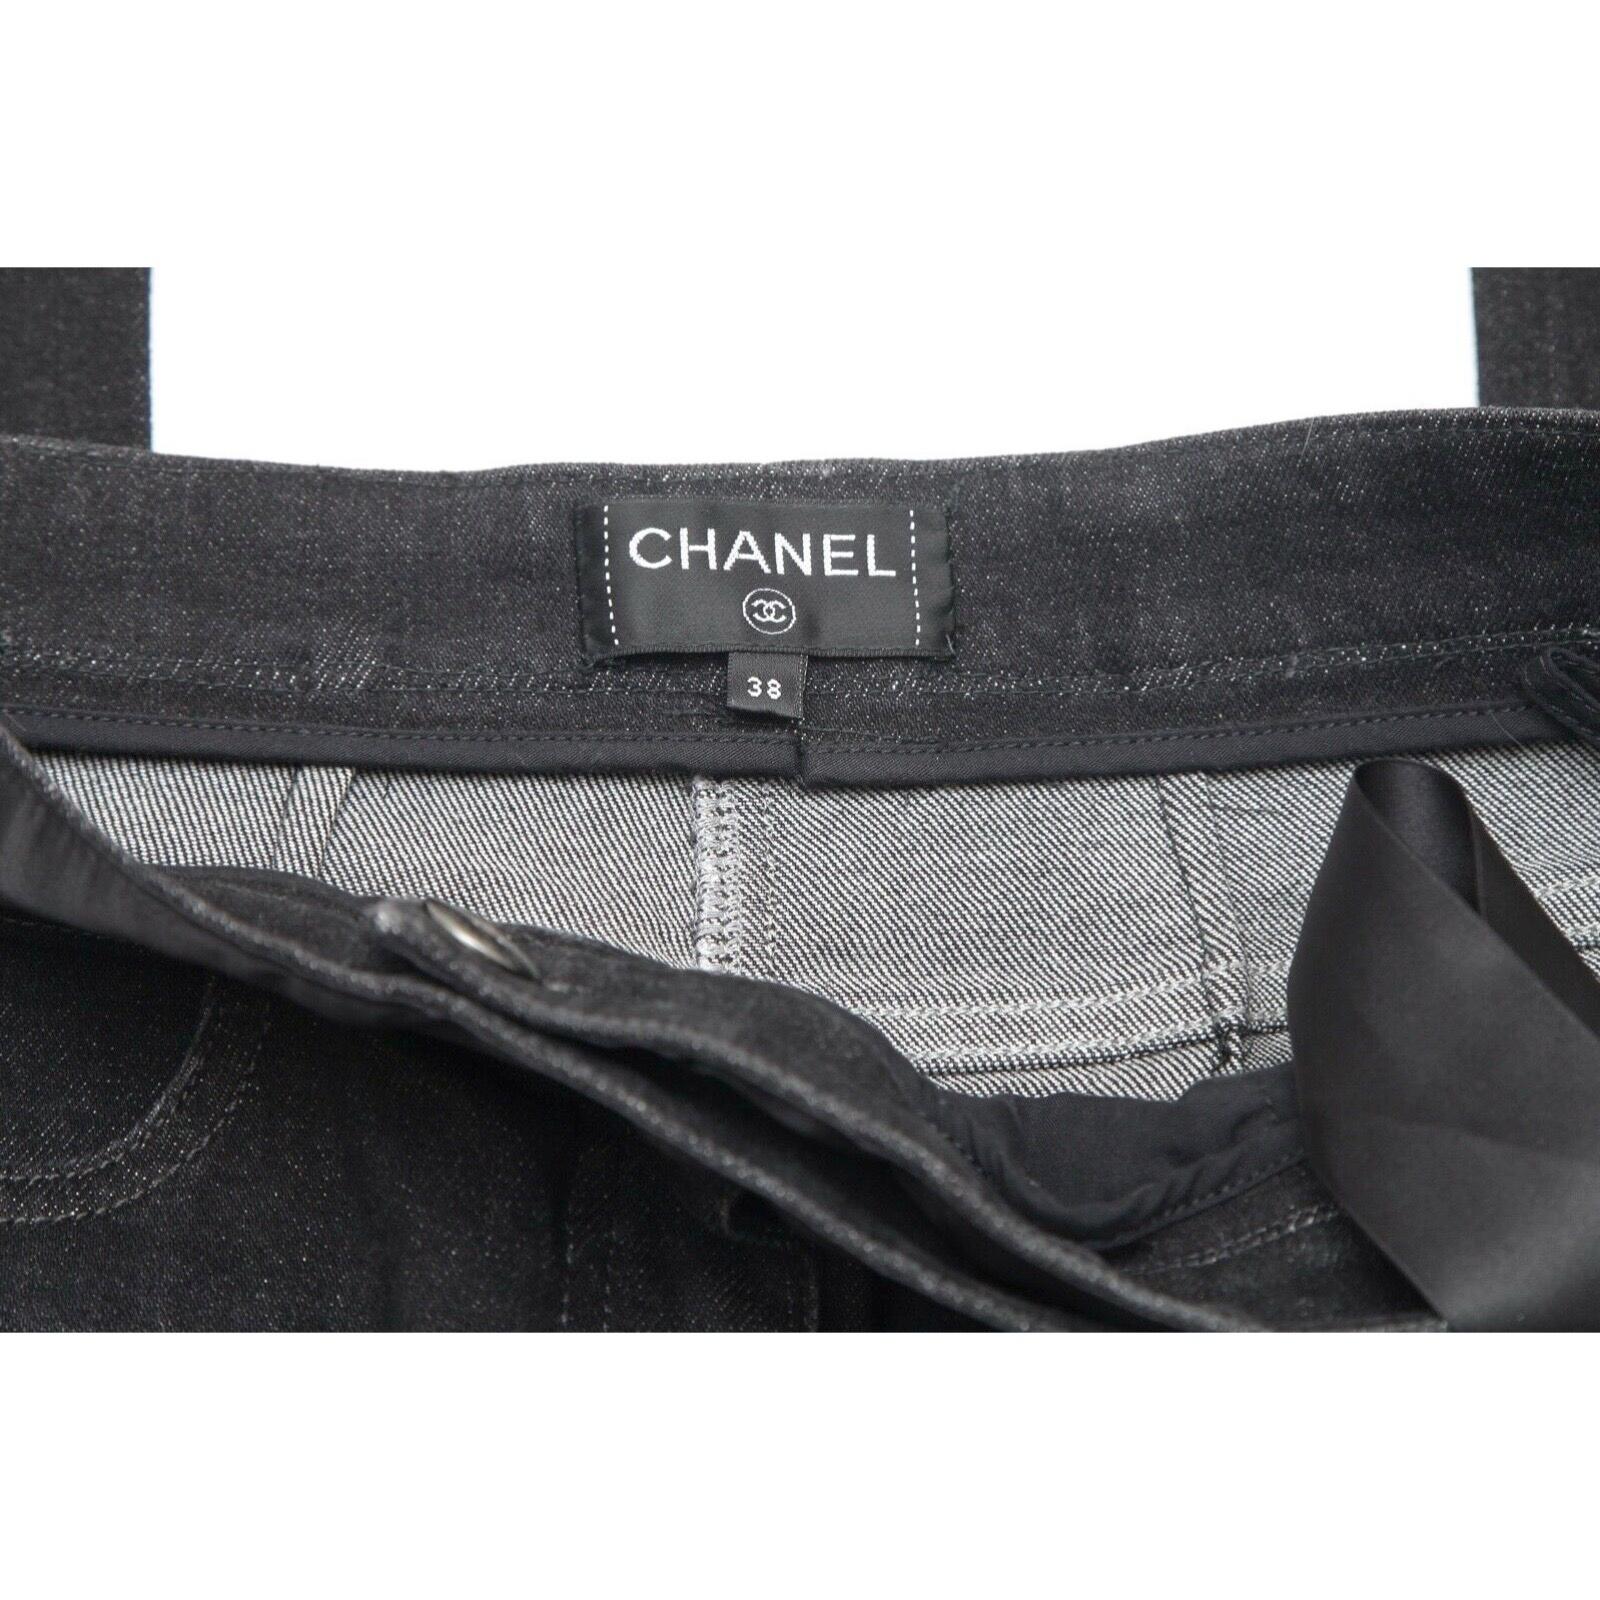 CHANEL Black Jeans Denim Straight Leg Mid-Rise Belt Rome Pockets Sz 38 In Good Condition For Sale In Hollywood, FL